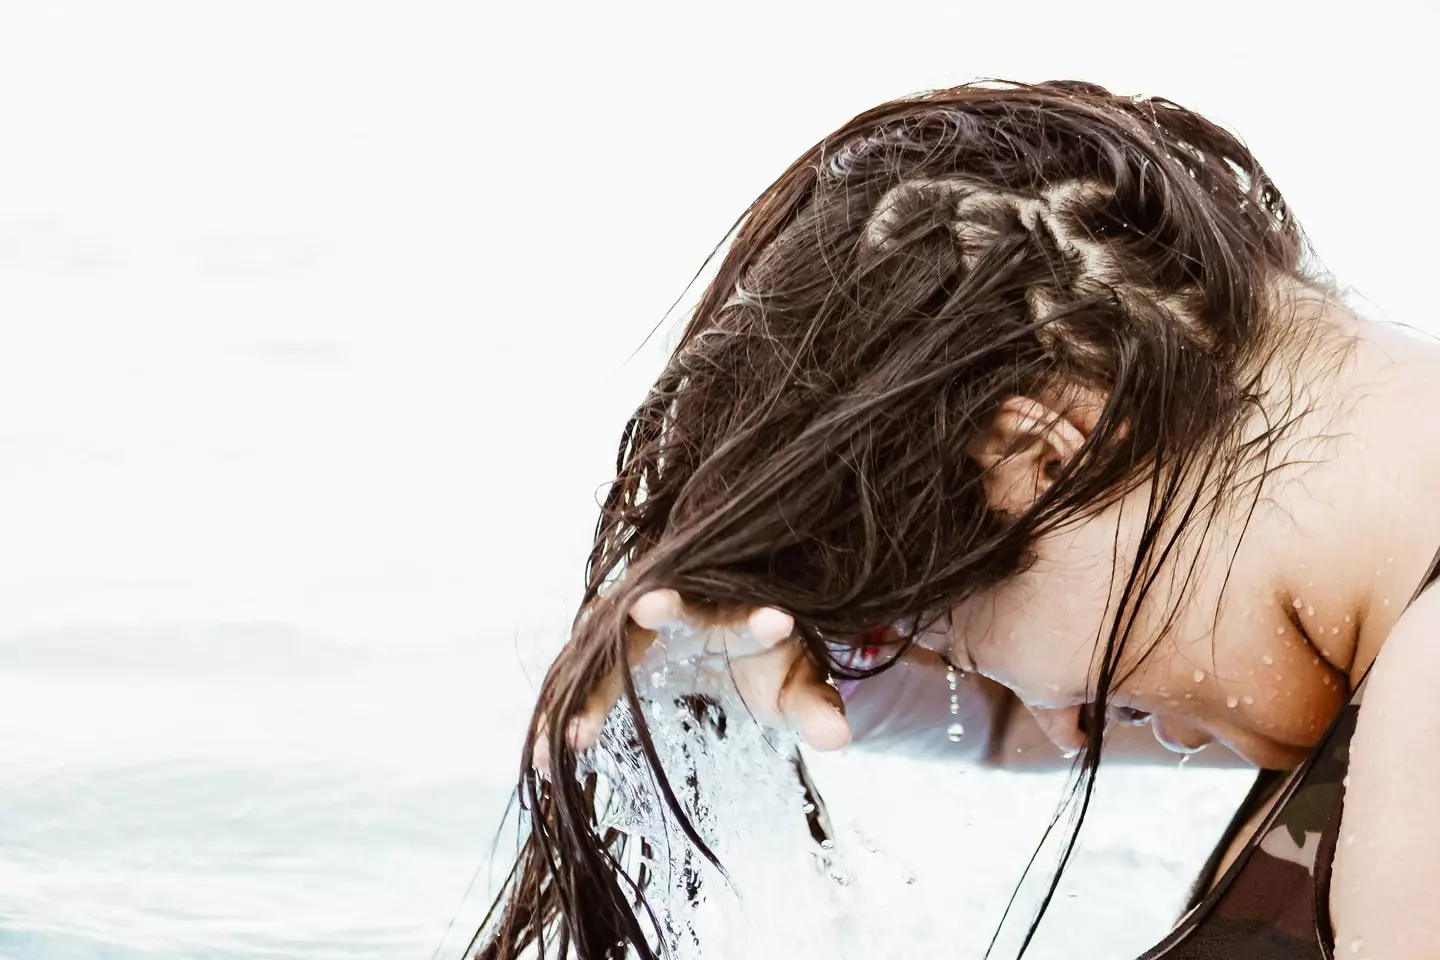 Shampoo can strip your hair of it's natural moisture, according to experts. [